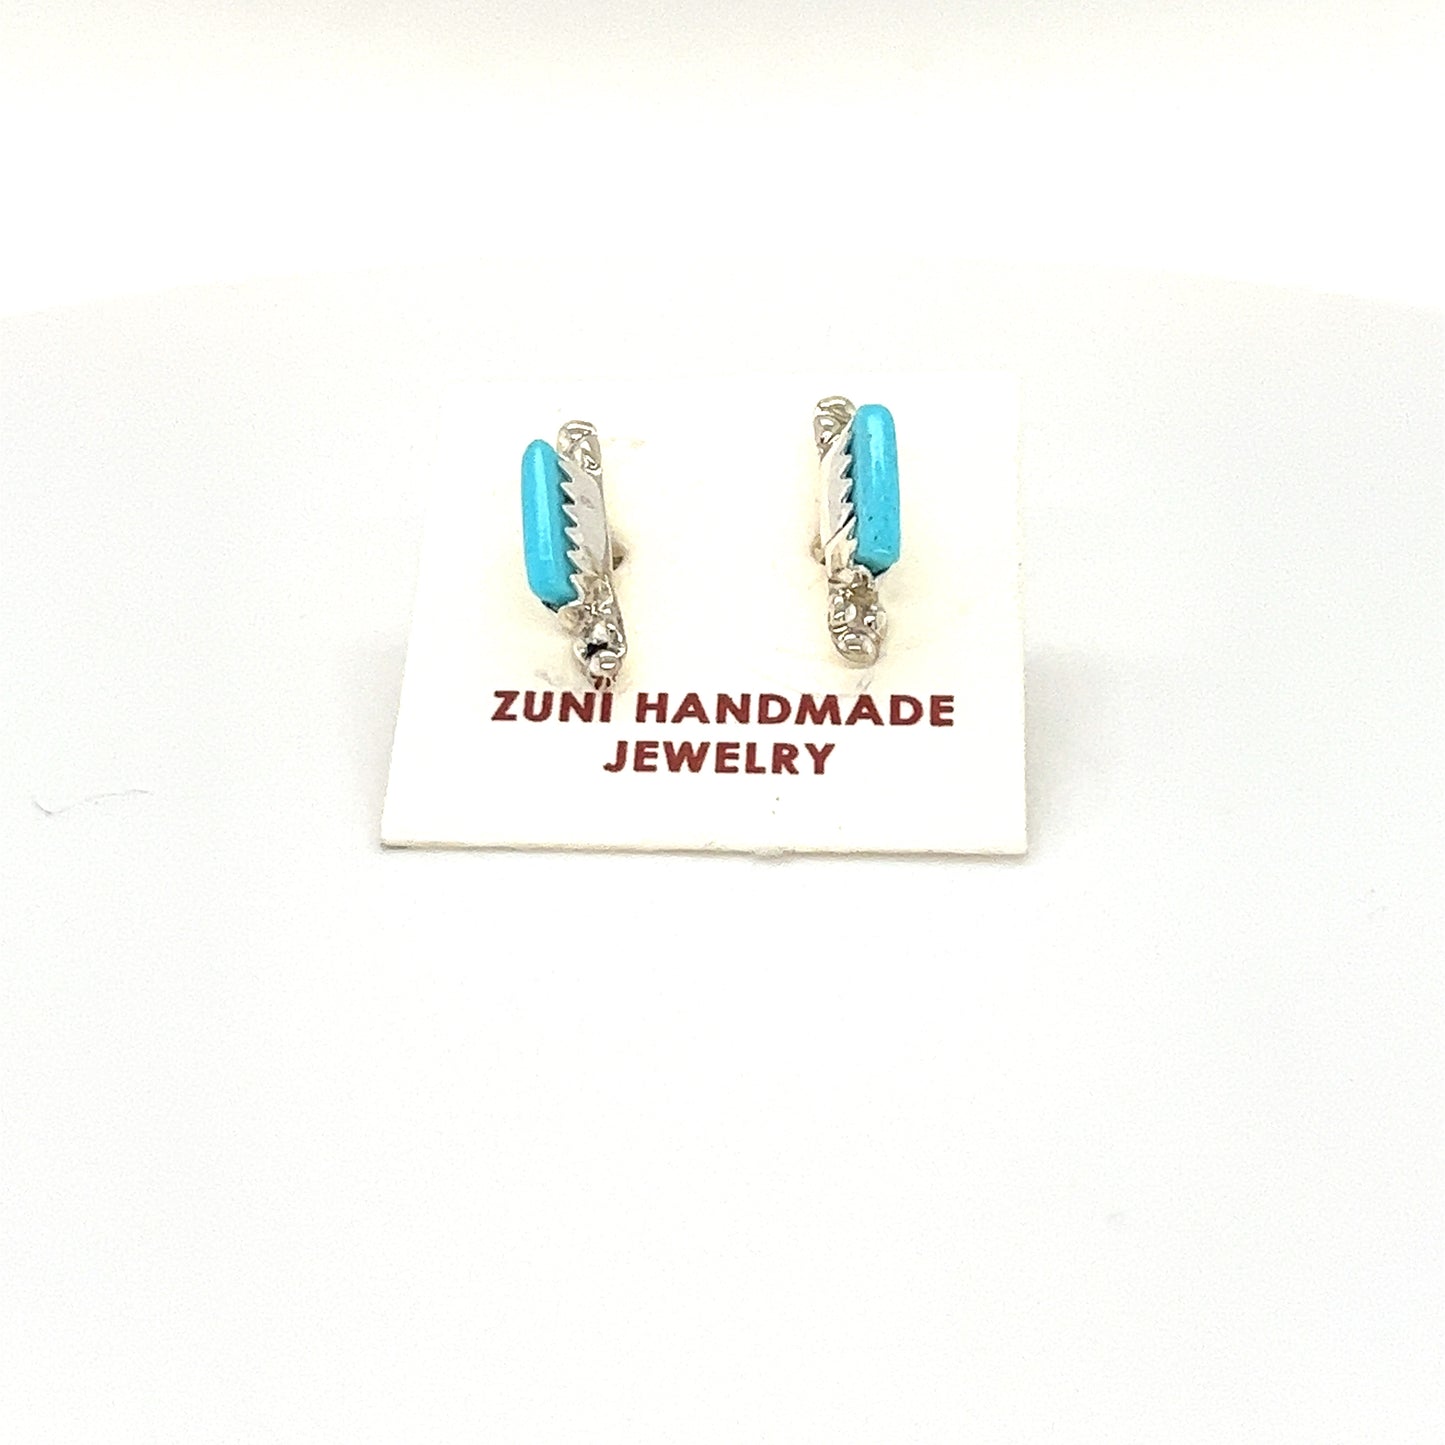 A pair of handcrafted Super Silver Zuni Turquoise Stud Earrings on a white background.